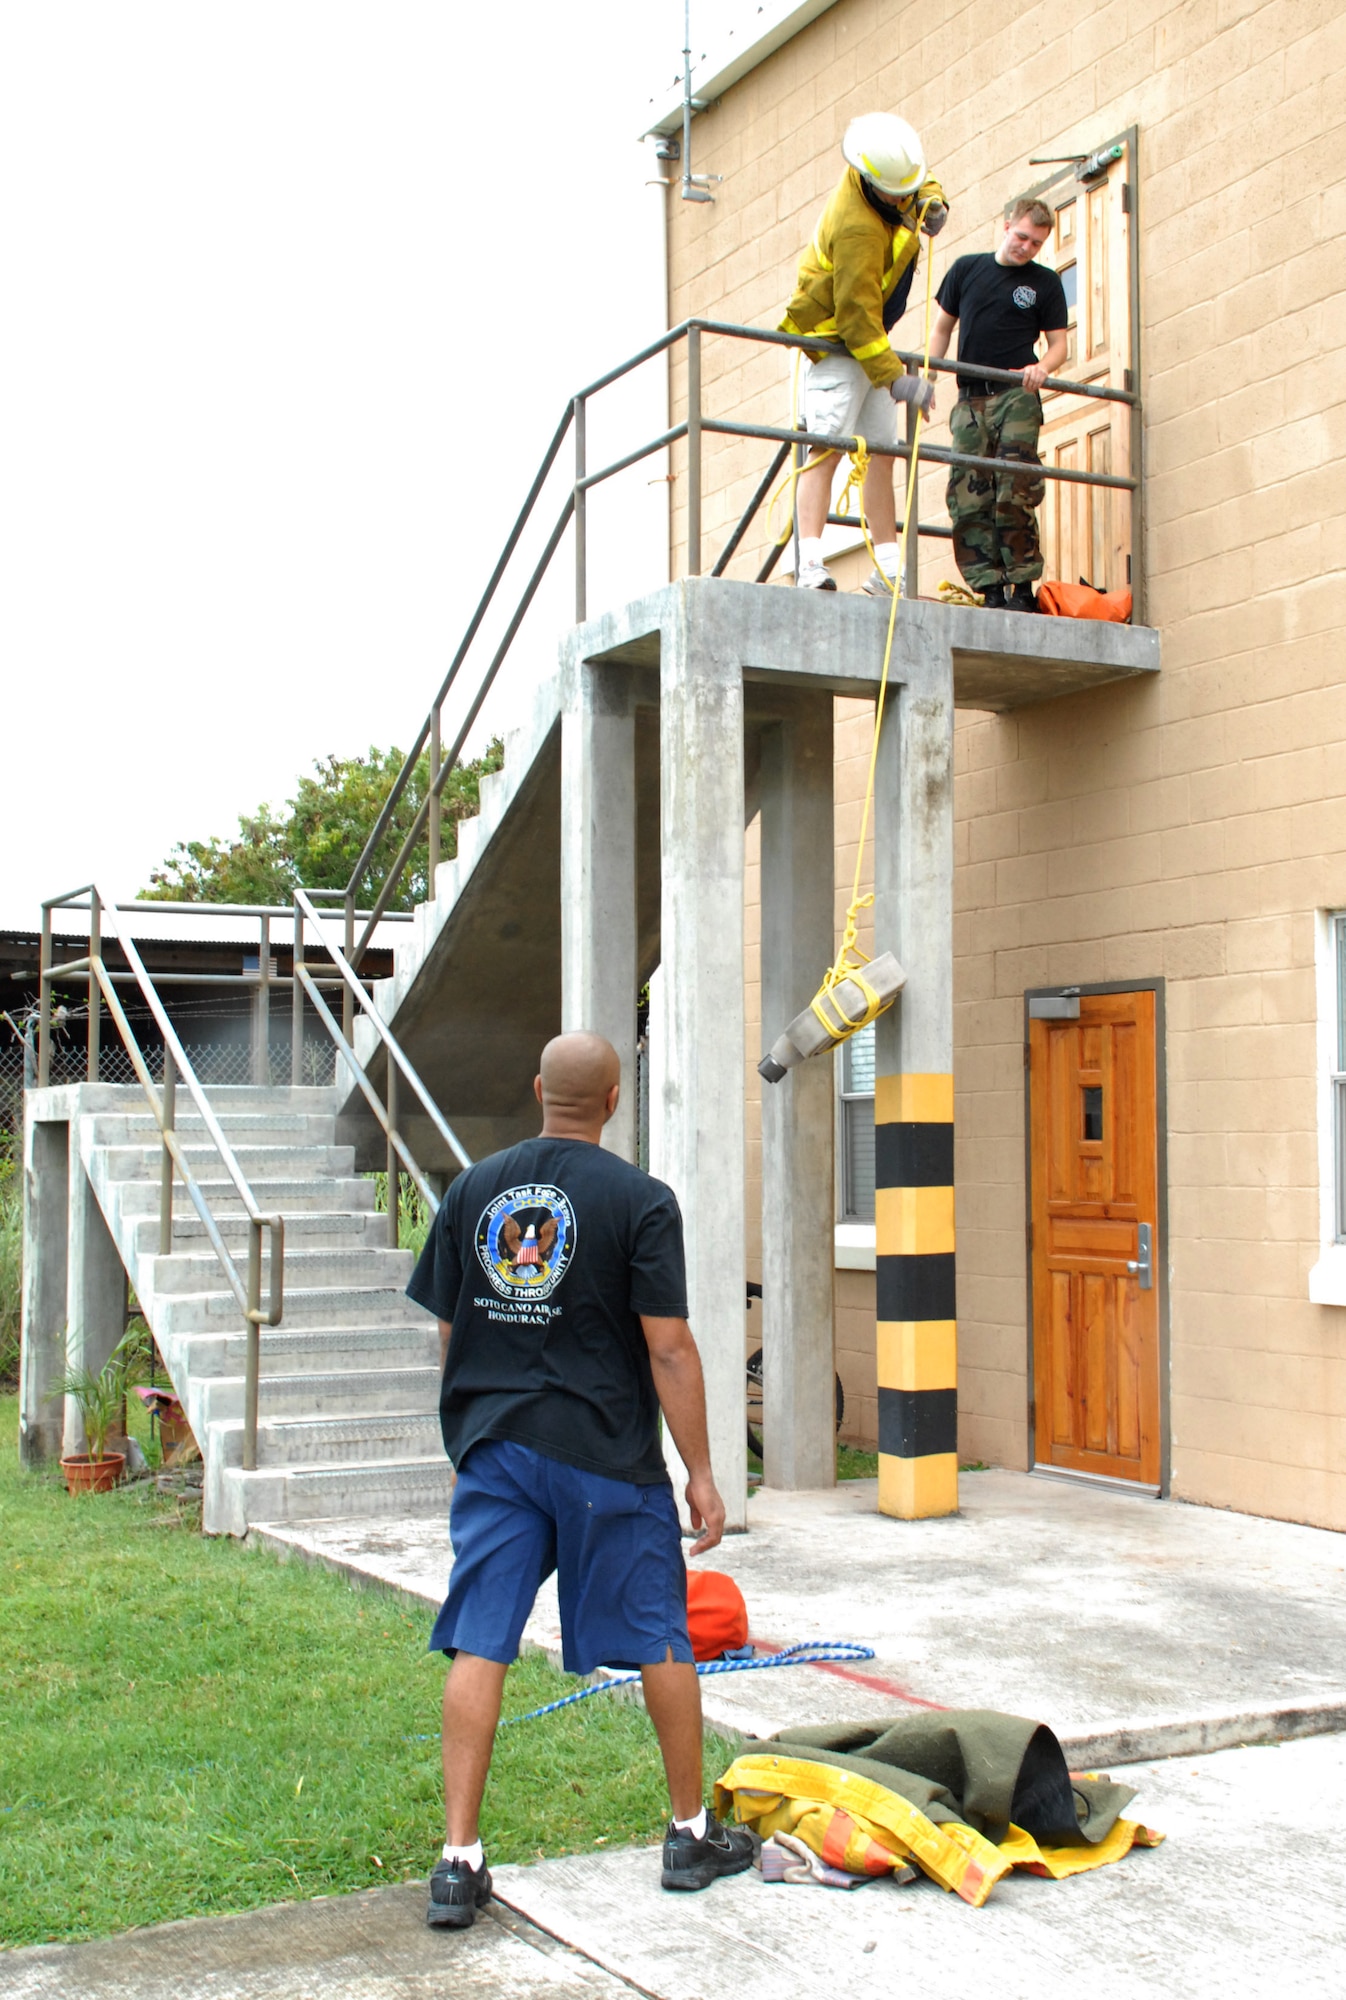 SOTO CANO AIR BASE, Honduras -- Staff Sgt. Aaron Mickle waits his turn in Soto Cano's Fire Muster relay as his teammate Tech. Sgt. Rob Russell, both Armed Forces Network, pulls a hose up to the second floor.  The relay challenge was Soto Cano Fire Department's closing event for Fire Prevention Week.  (U.S. Air Force photo by 1st Lt. Erika Yepsen)